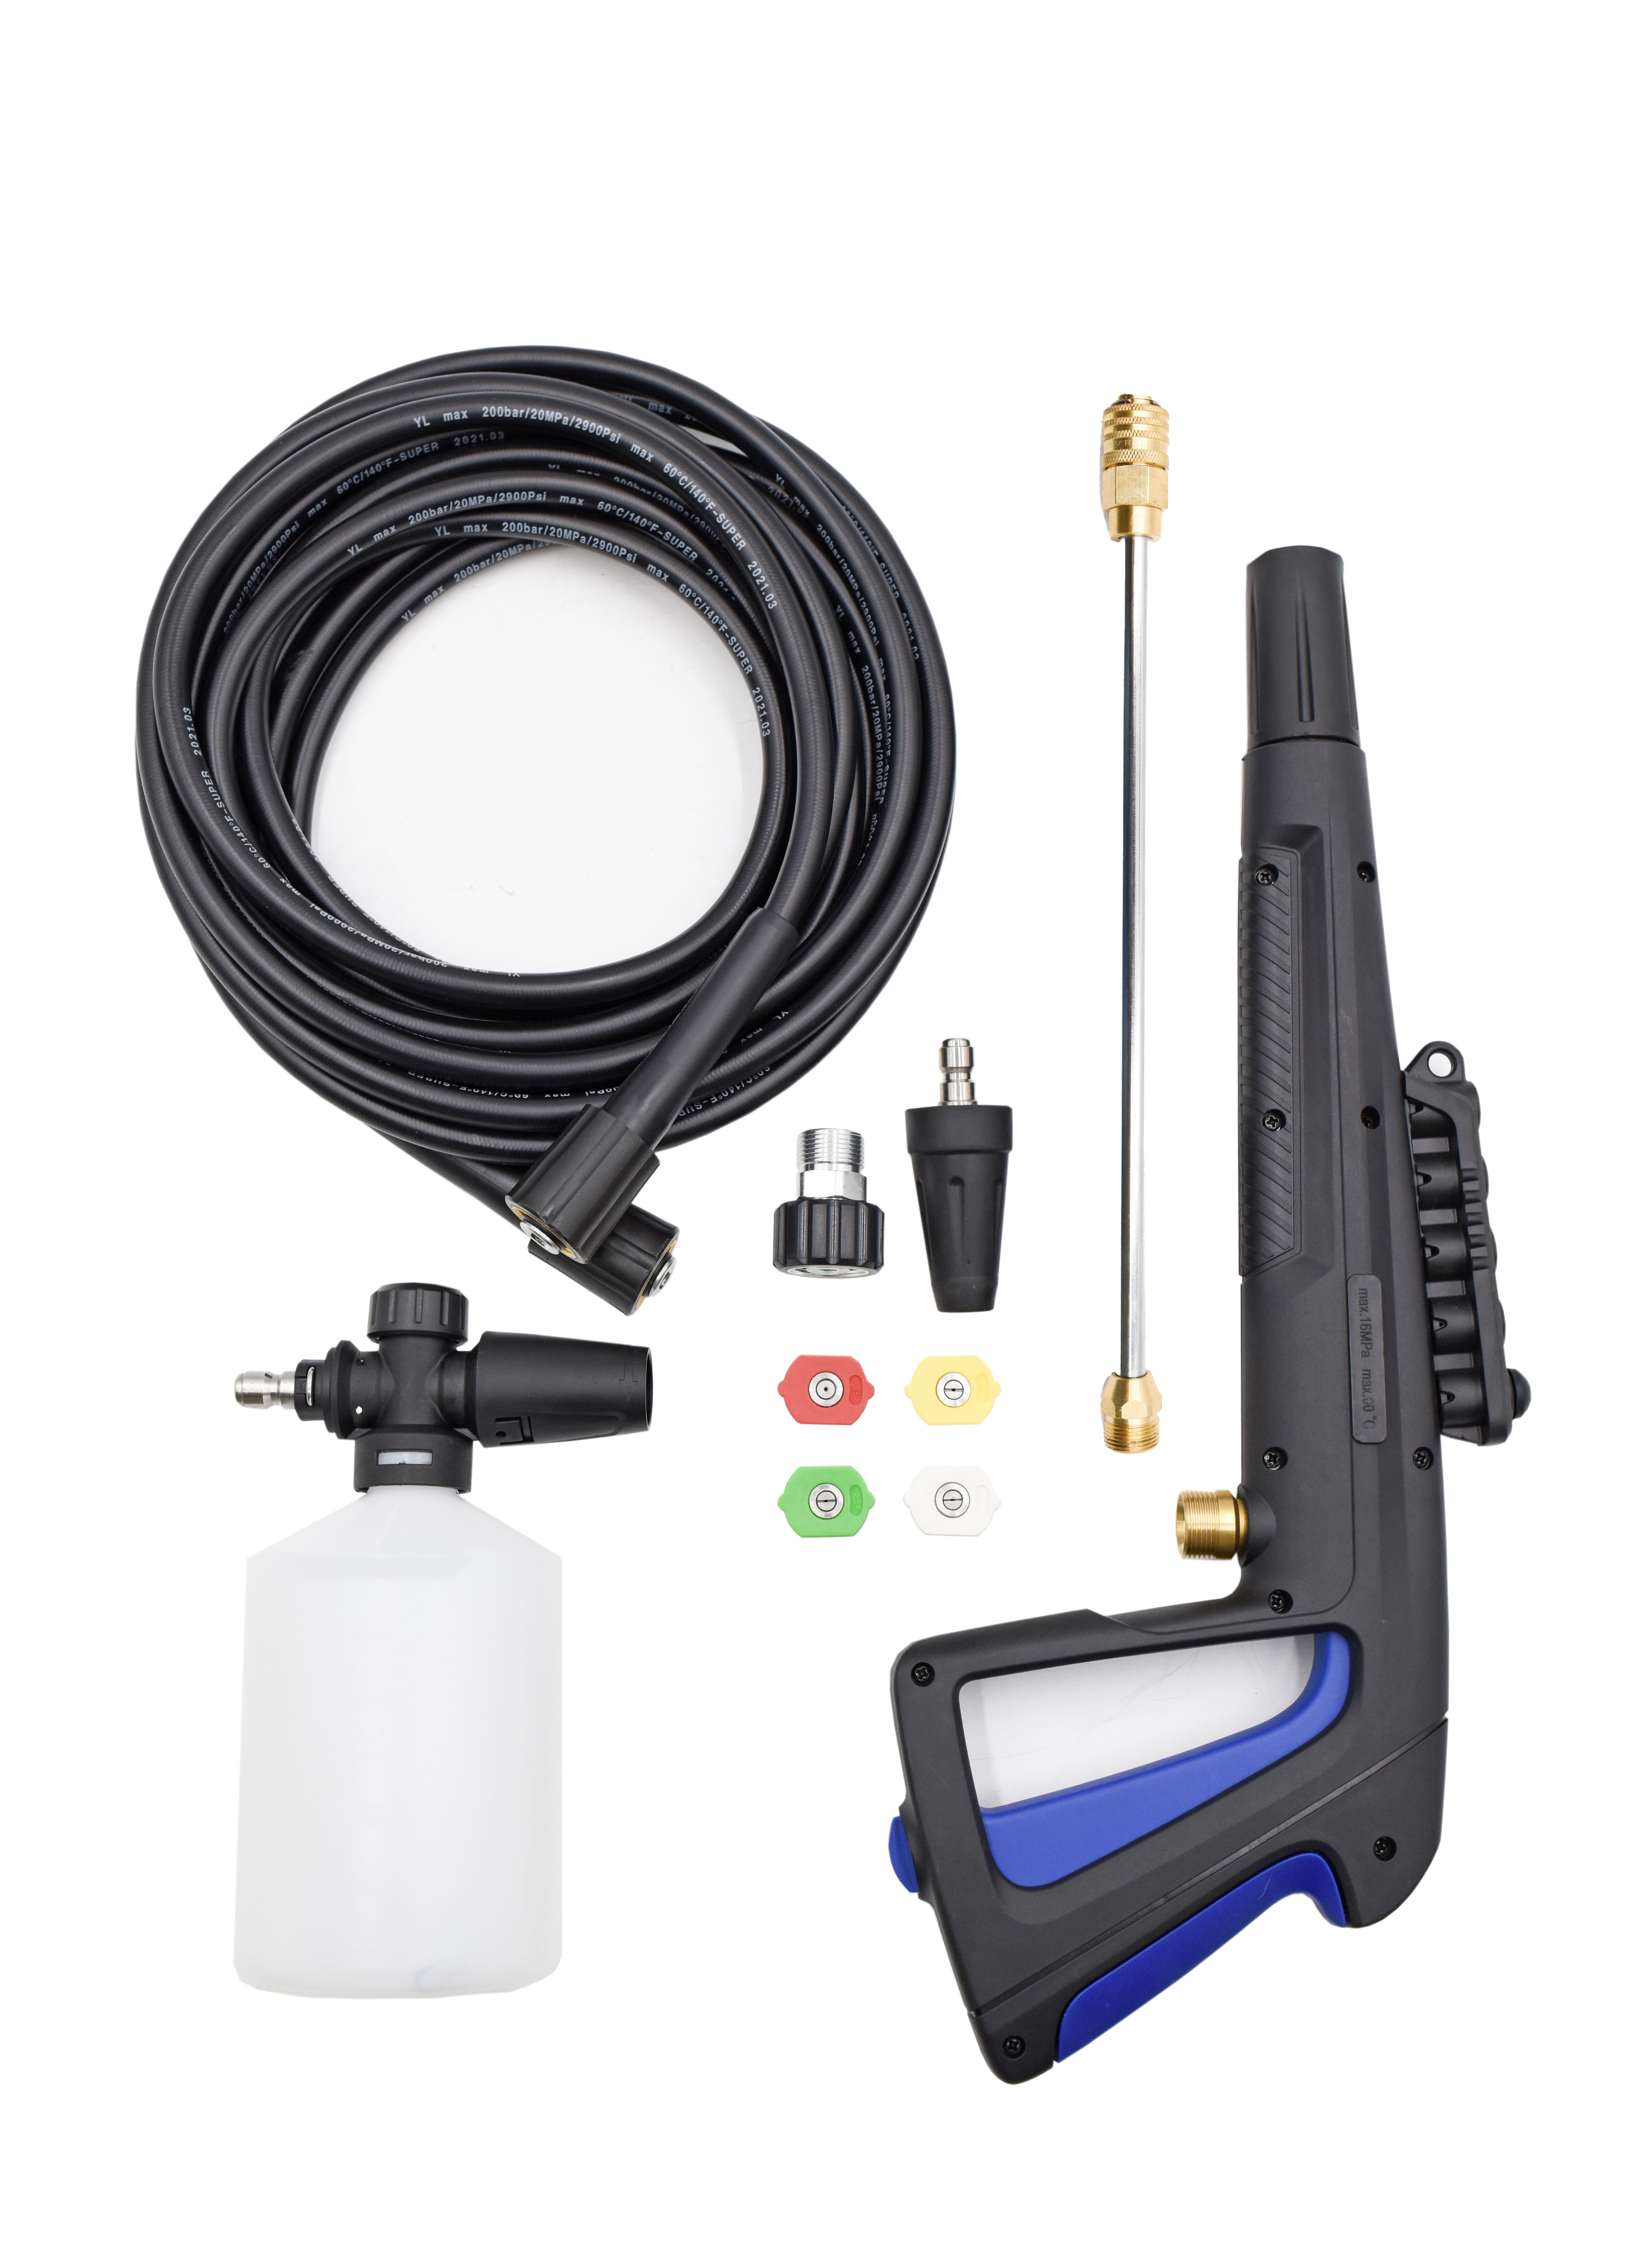 Will the AR Blue clean replacement kit fit my 1600 task force power washer?